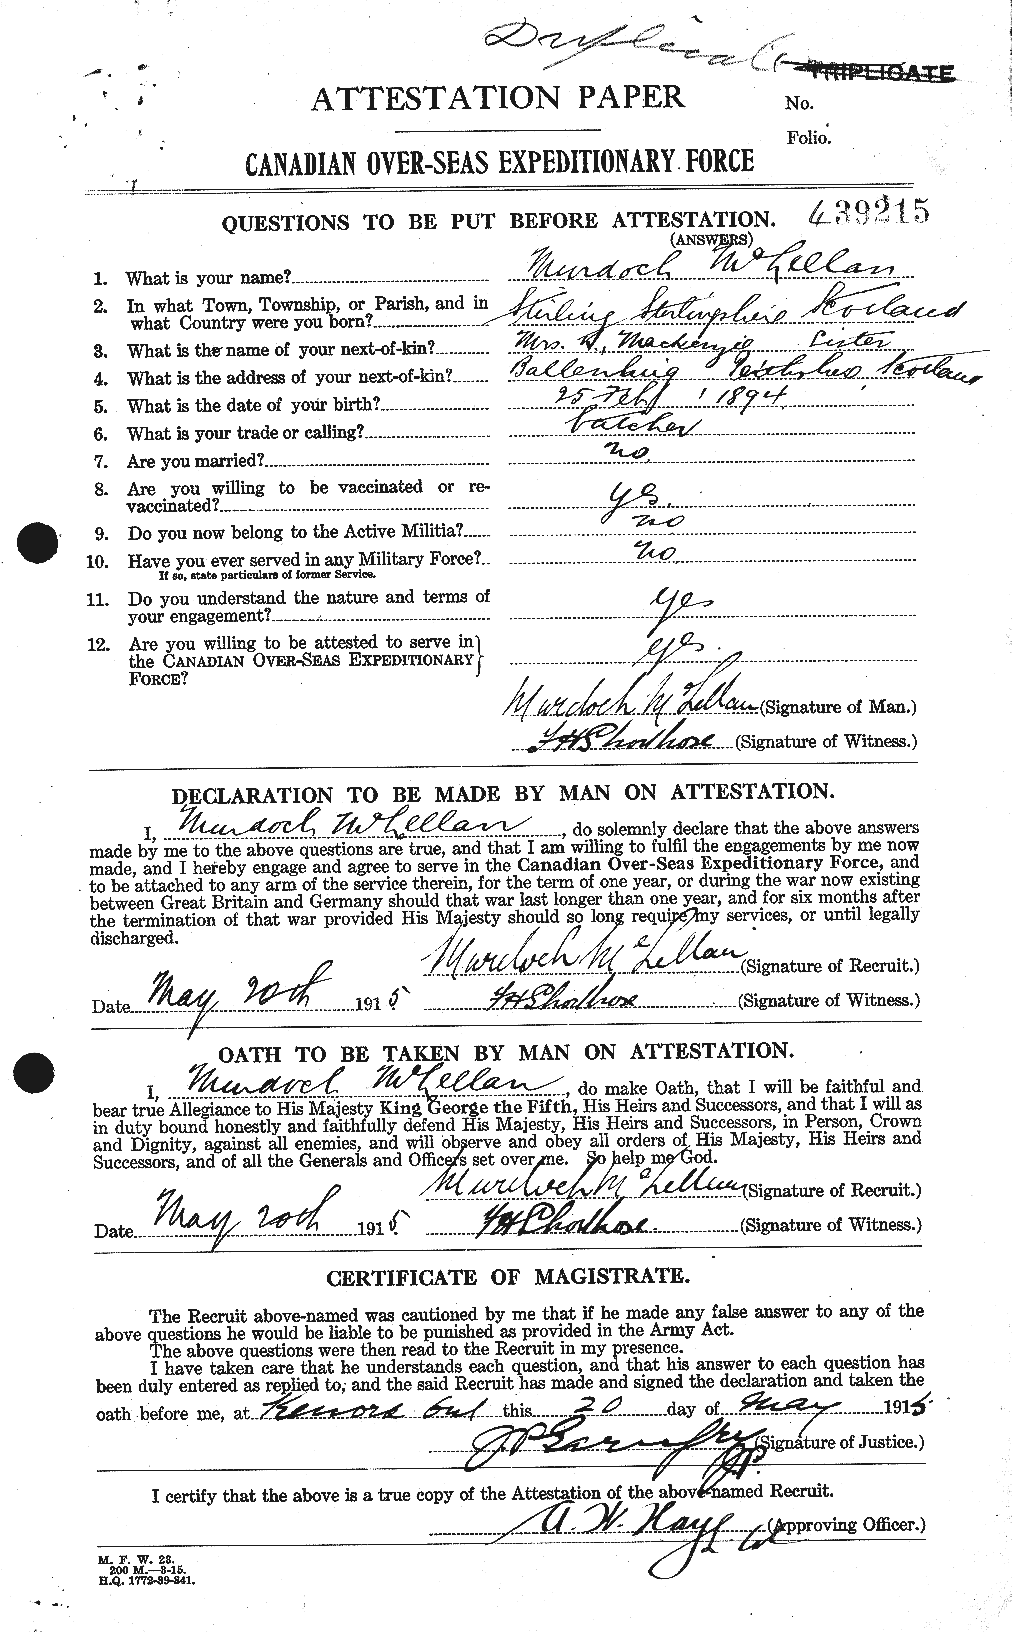 Personnel Records of the First World War - CEF 536755a